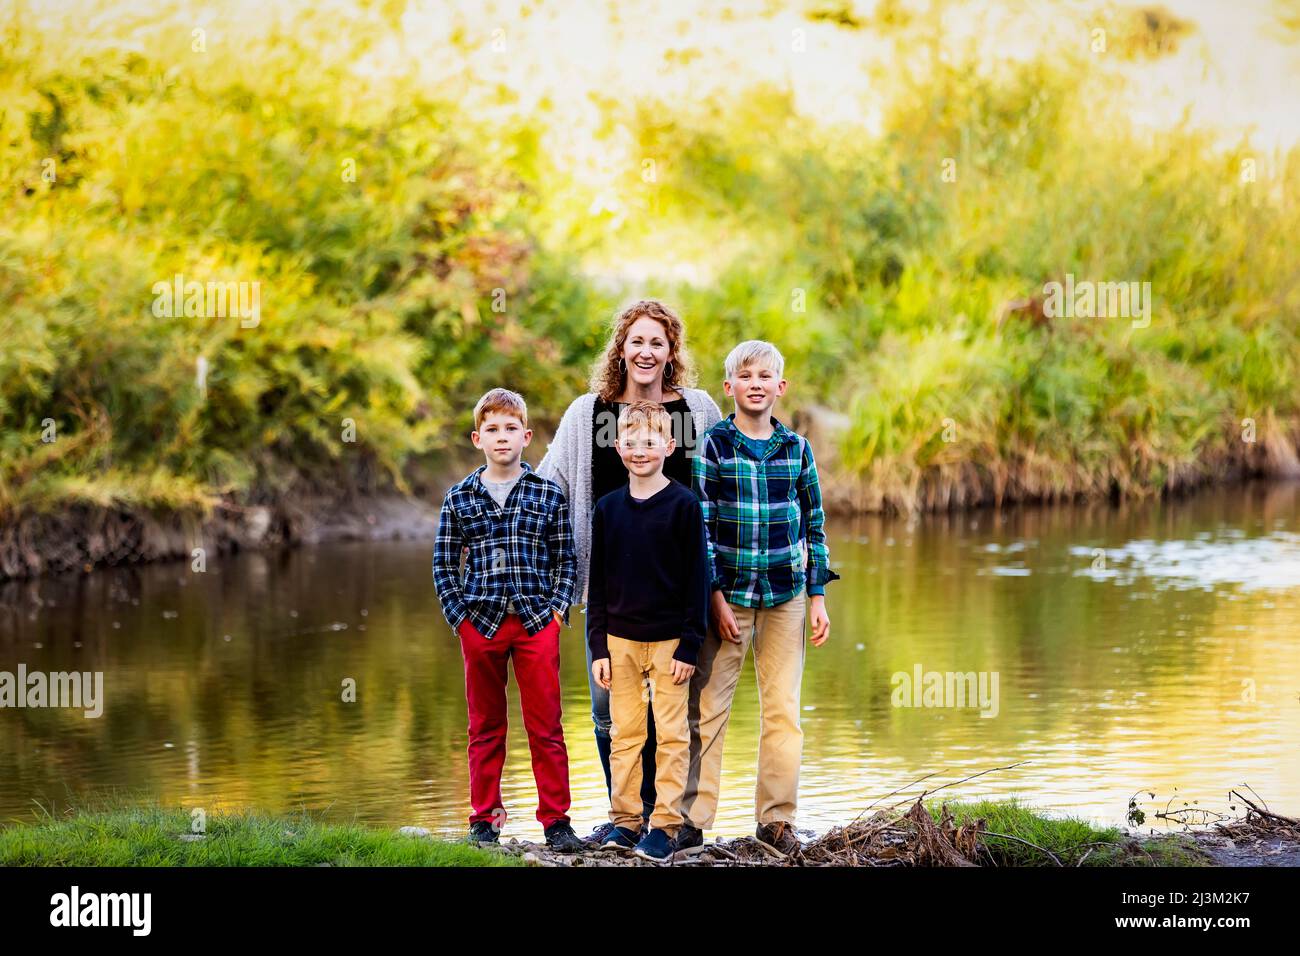 Portrait of a mother with three boys standing at the water's edge in a park in autumn; Edmonton, Alberta, Canada Stock Photo